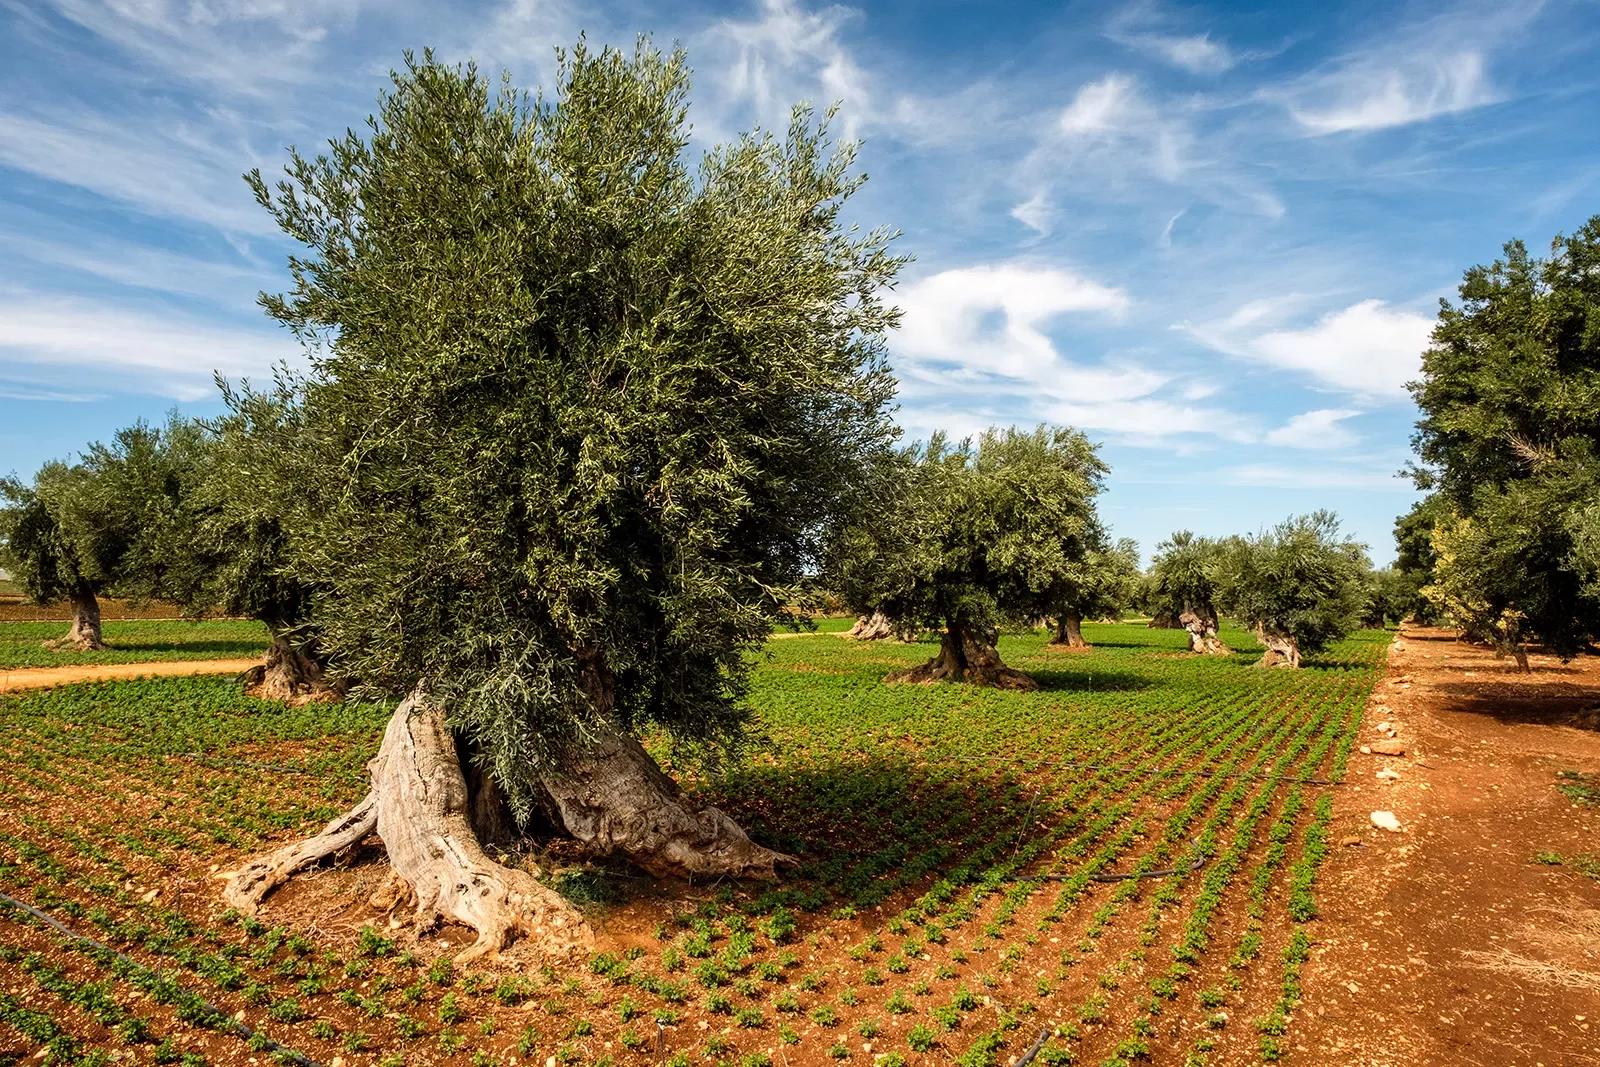 Shot of numerous olive trees in orchard.